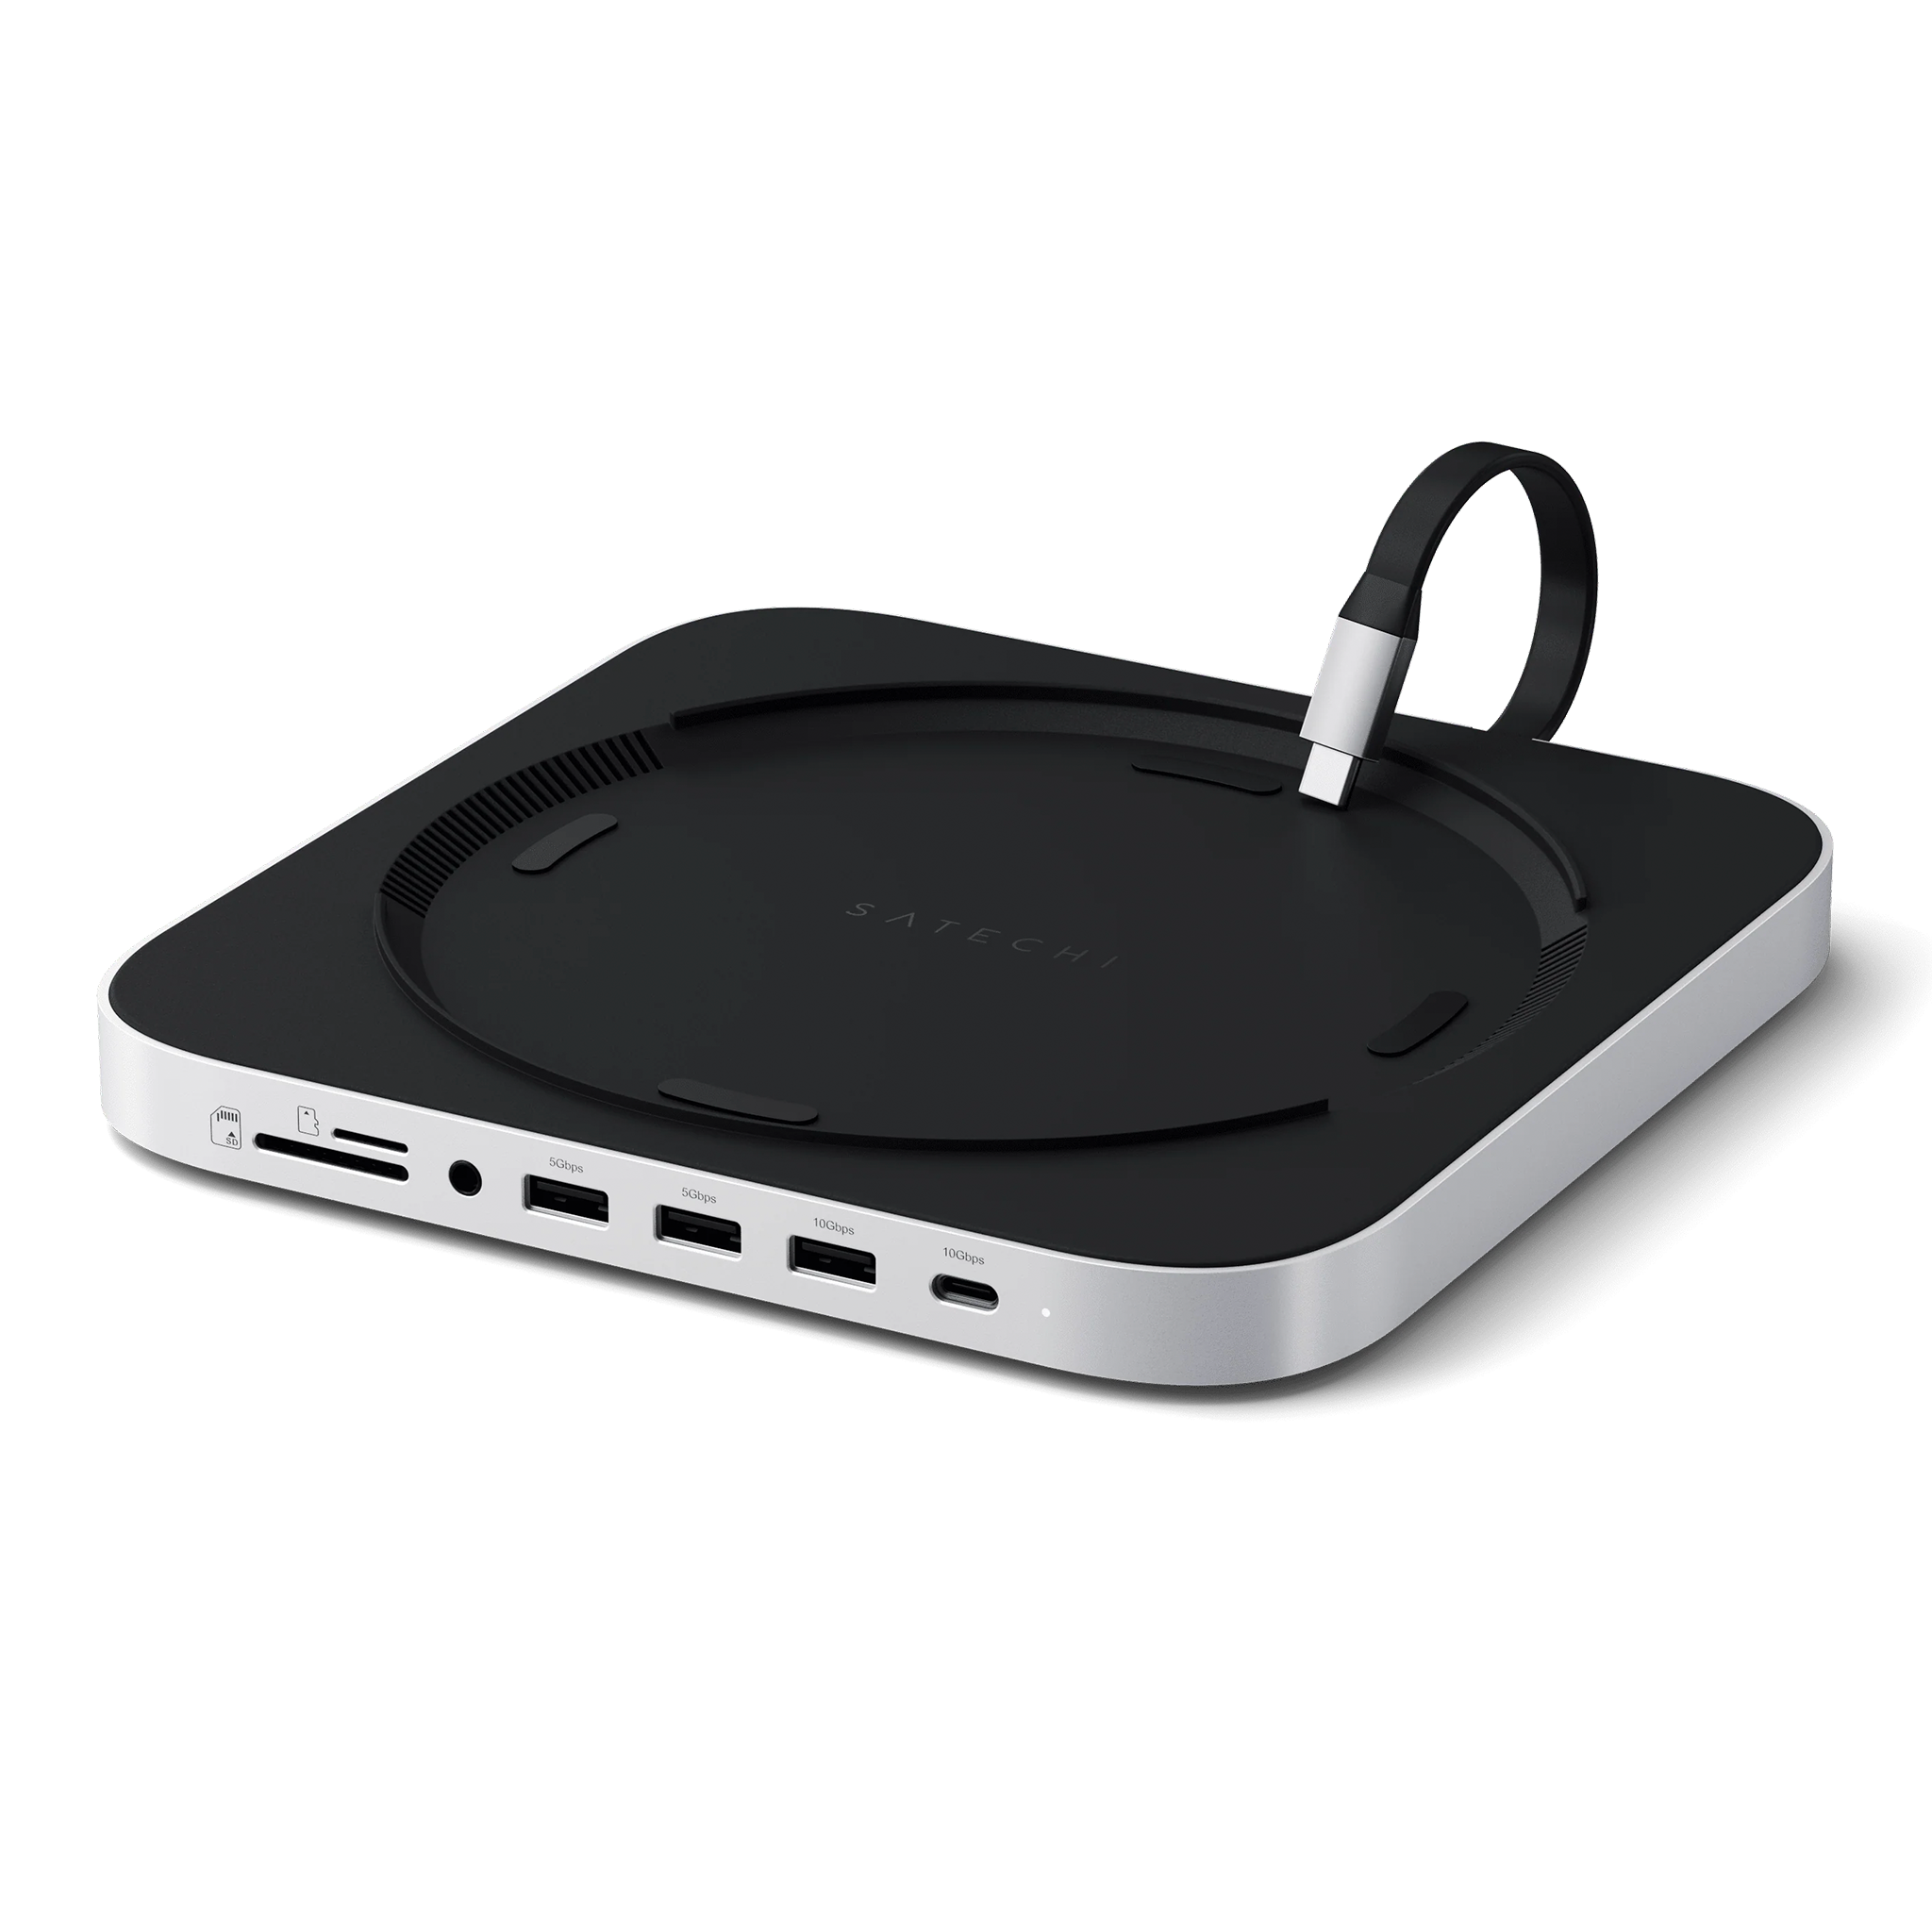 Satechi Stand and Hub for Mac mini refreshed with NVMe SSD slot